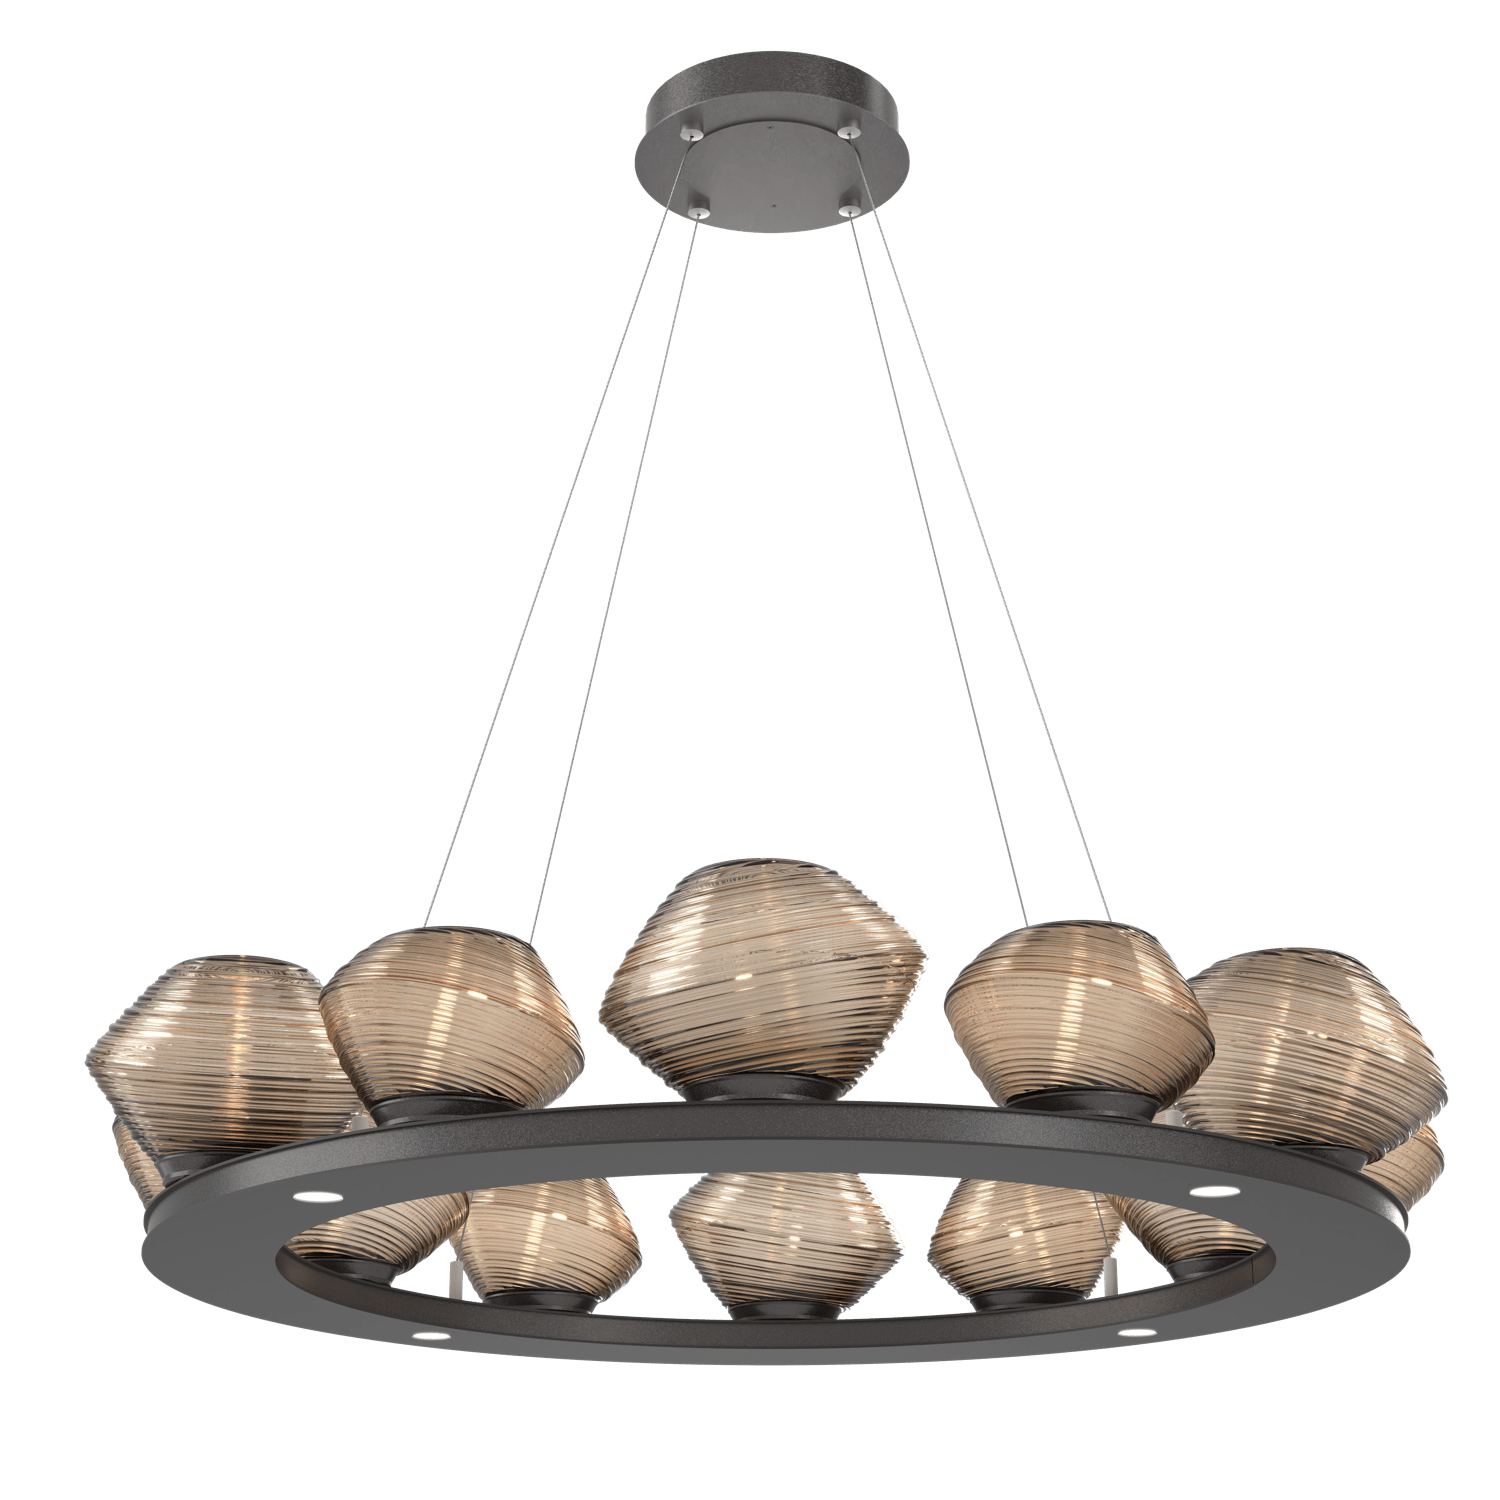 CHB0089-0C-GP-B-Hammerton-Studio-Mesa-36-inch-ring-chandelier-with-graphite-finish-and-bronze-blown-glass-shades-and-LED-lamping